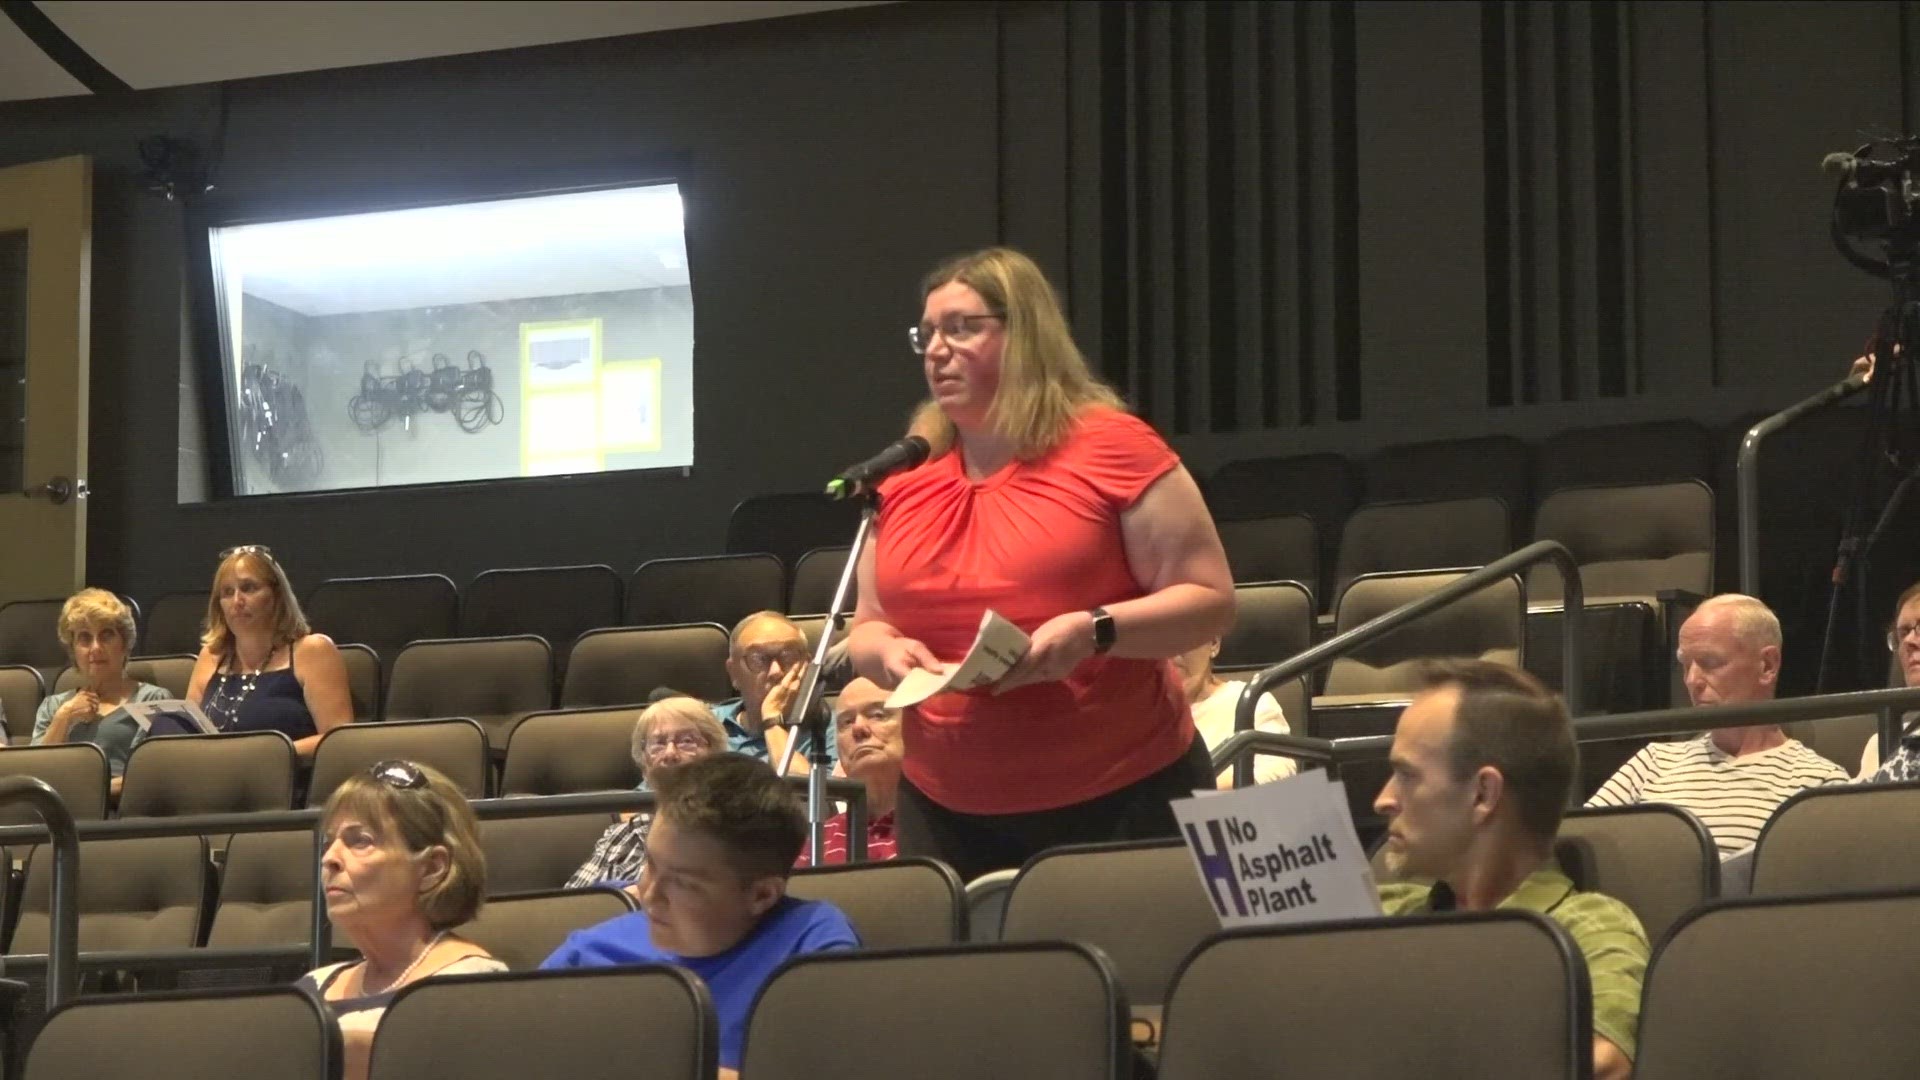 Many expressed concern at a public meeting Wednesday, over dust that might affect children at nearby schools.